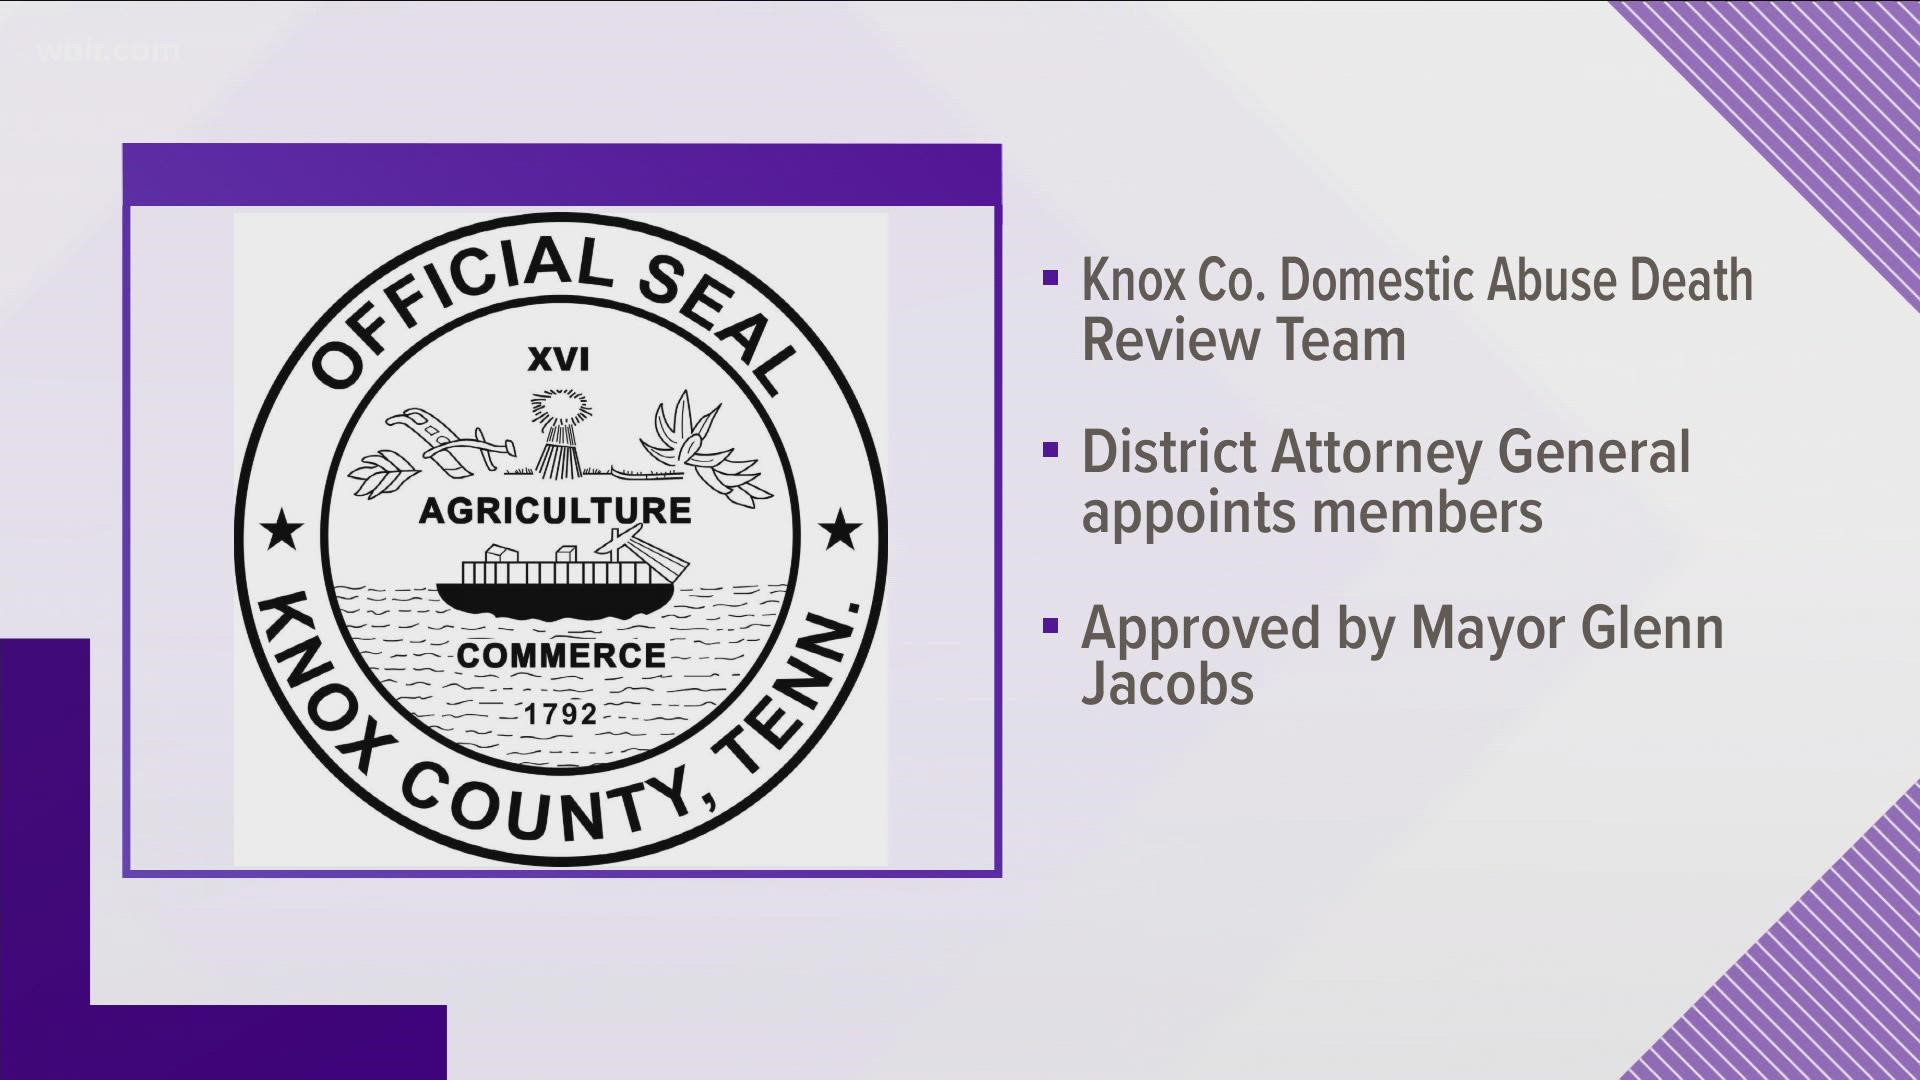 A new team will identify and review domestic abuse deaths in Knox County.